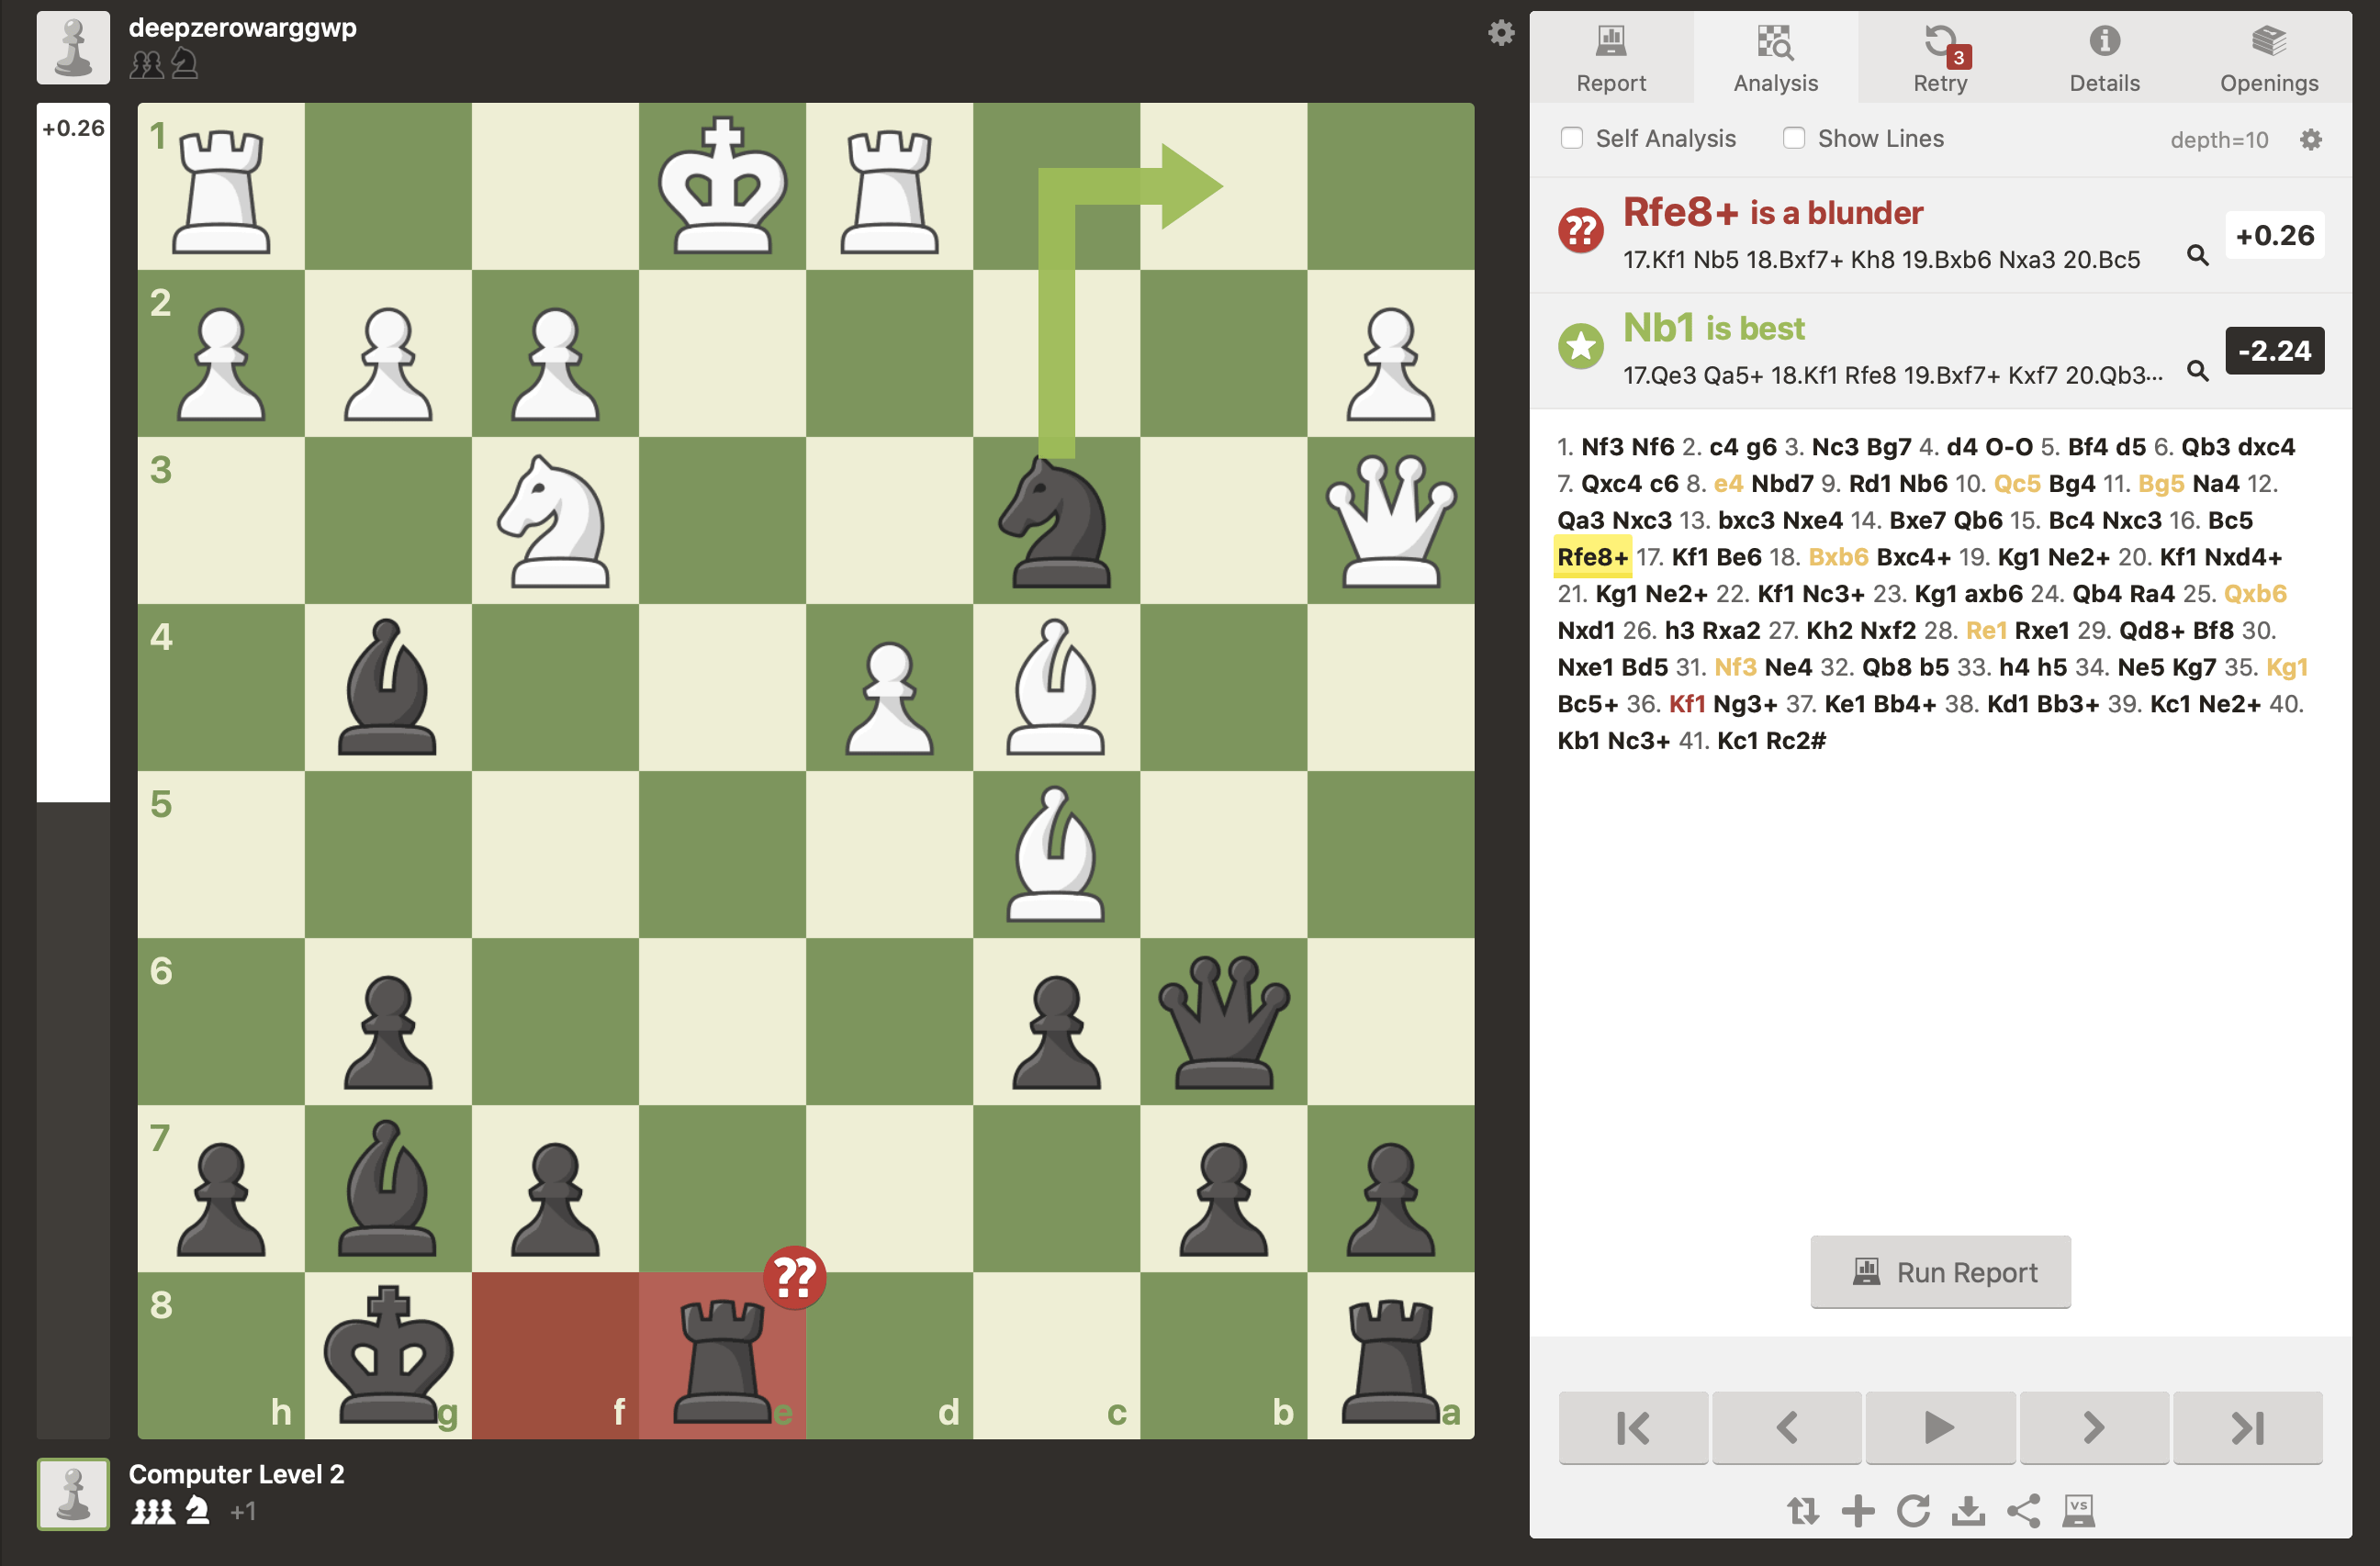 Analysis with Chess Players.: (a) Analysis of L (number of language